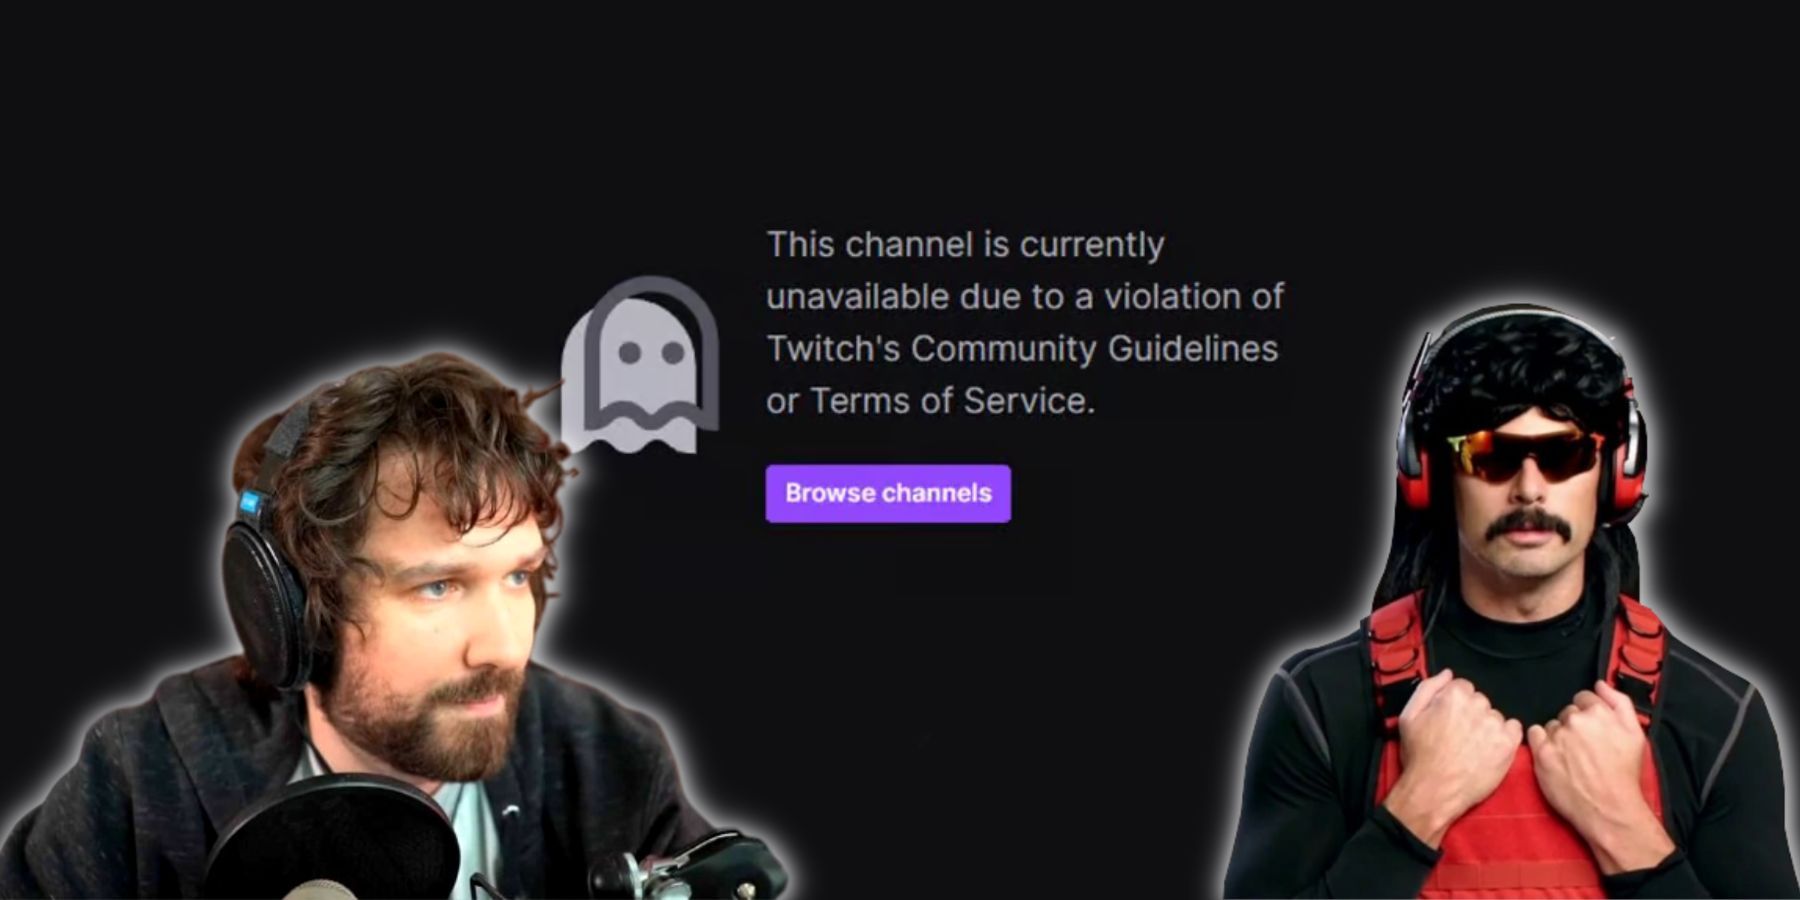 Destiny receives backlash for comments about black zoomer streamers  criticizing IShowSpeed and Kai Cenat